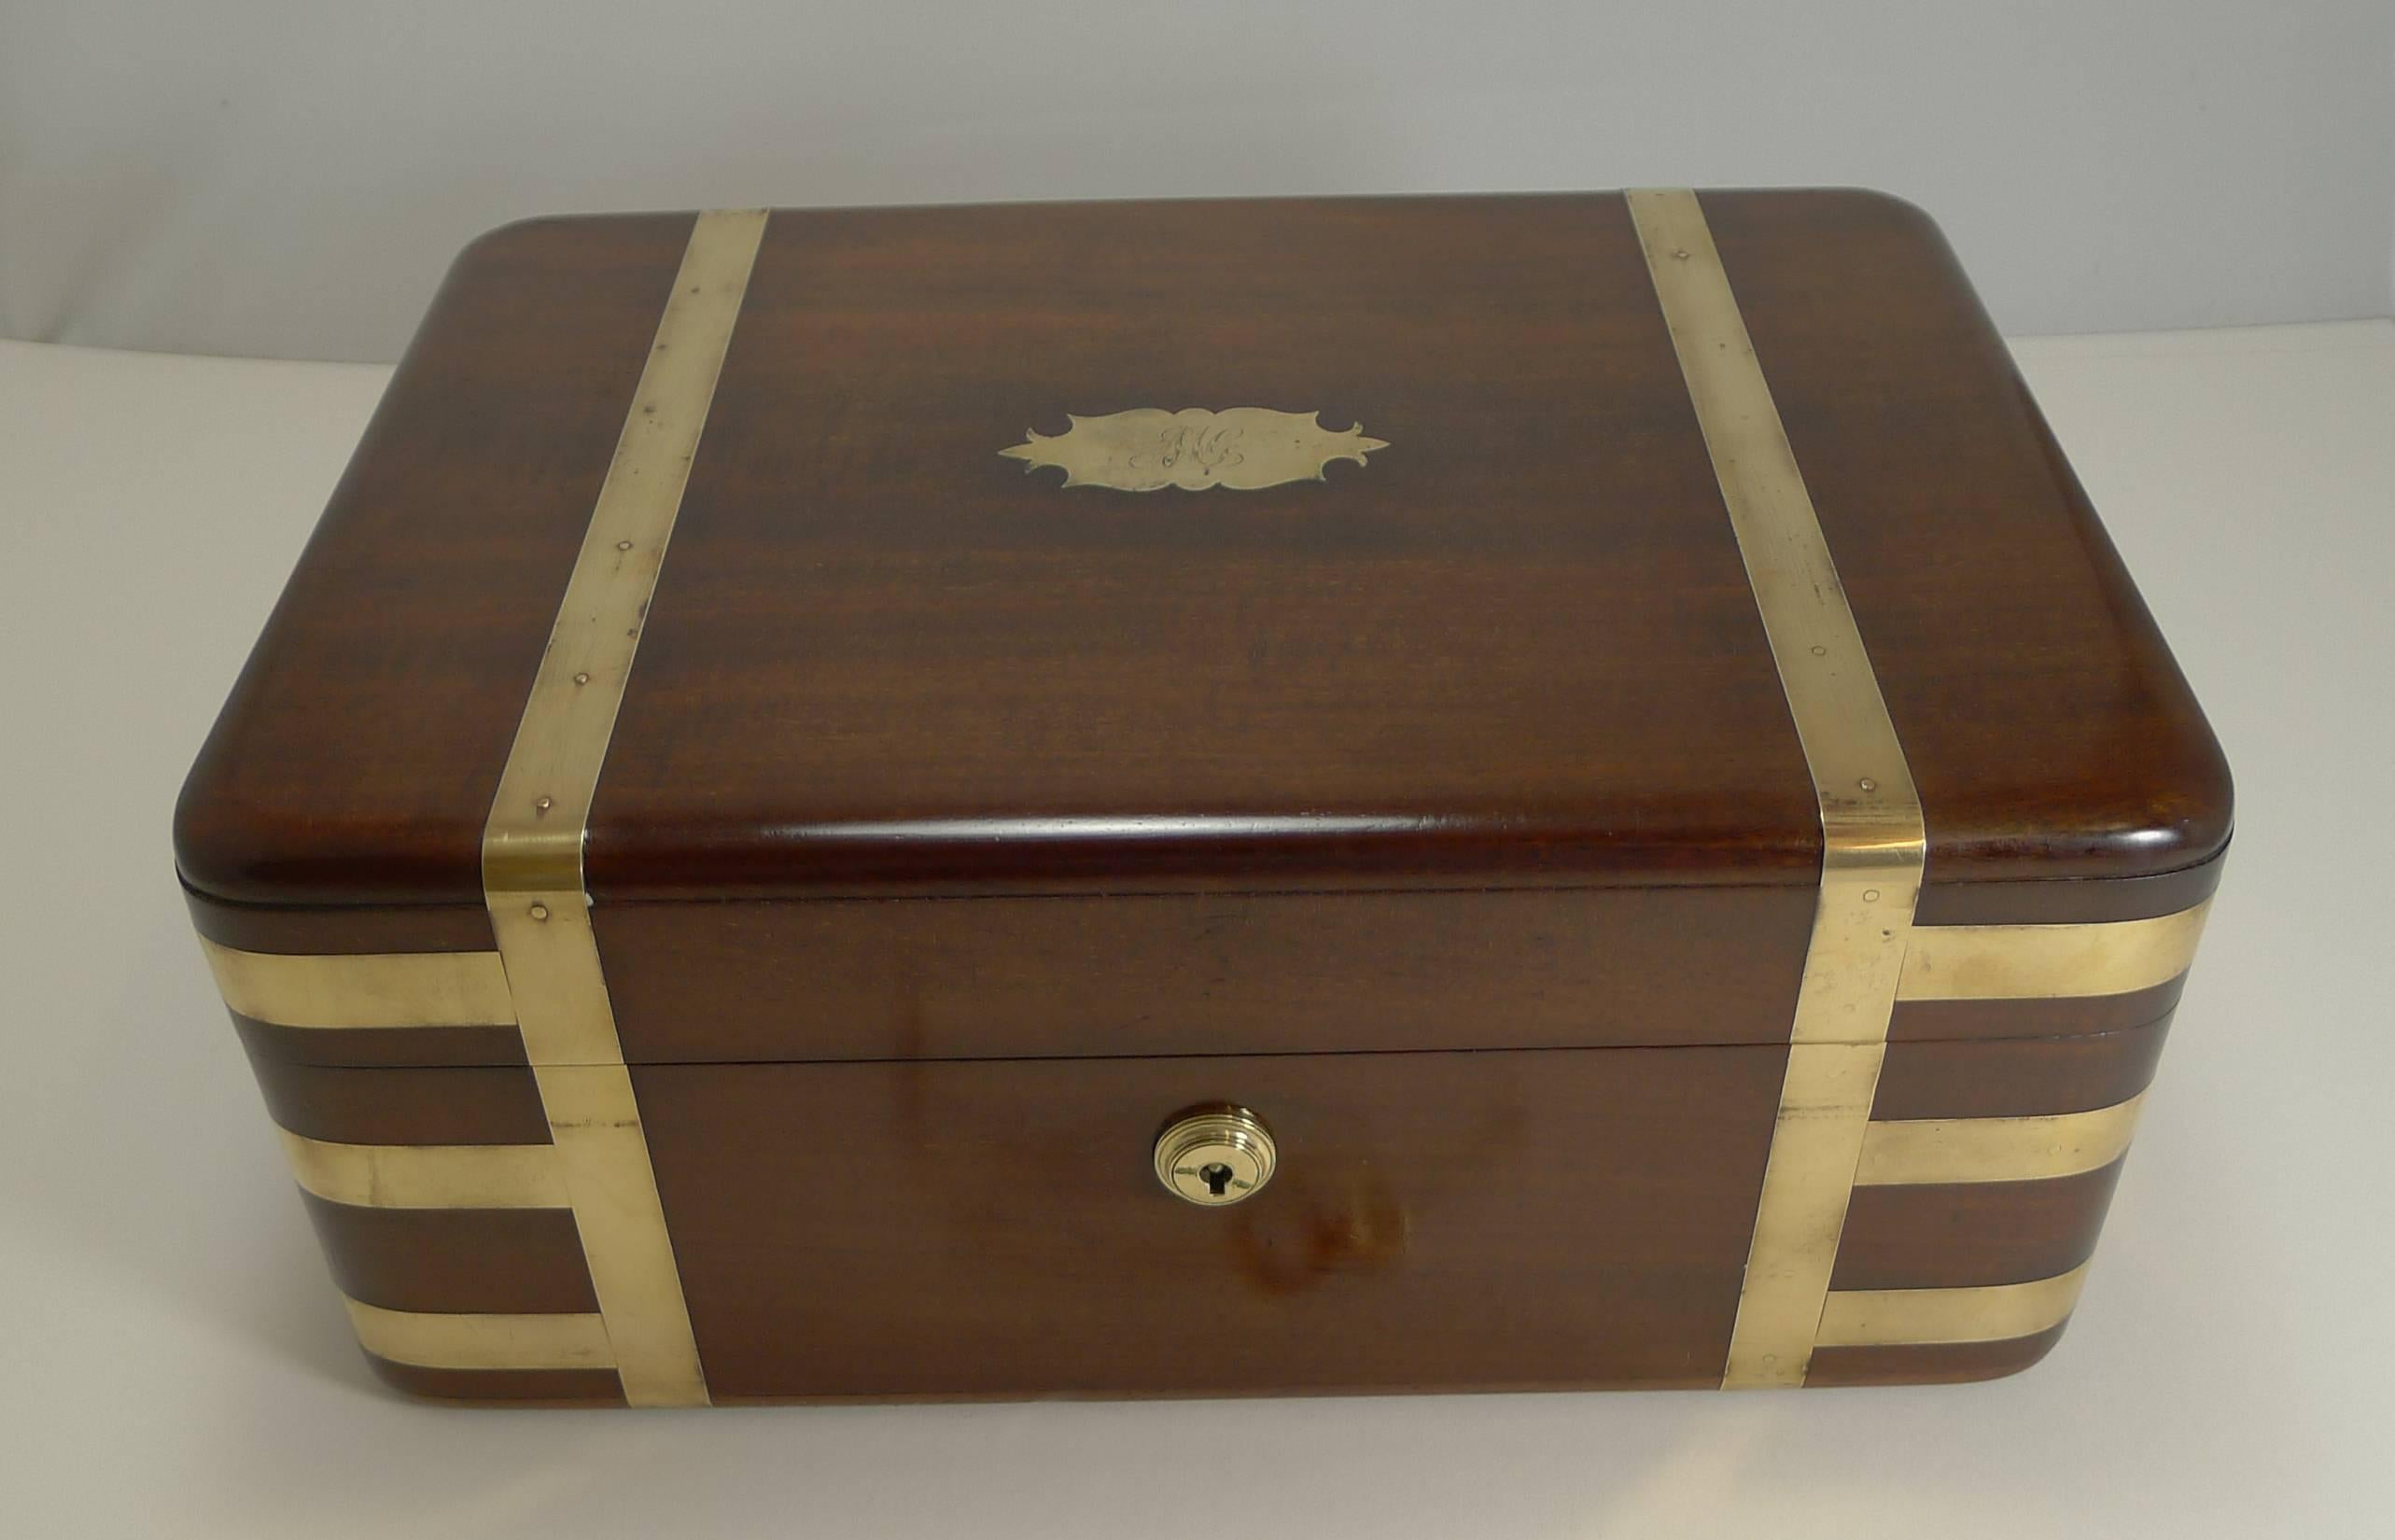 A great early 19th century brass bound campaign box made from a very hefty piece of solid mahogany. This top-notch example box is beautifully brass bound and has a pair of flush inlaid brass military style handles to the sides.

The box is